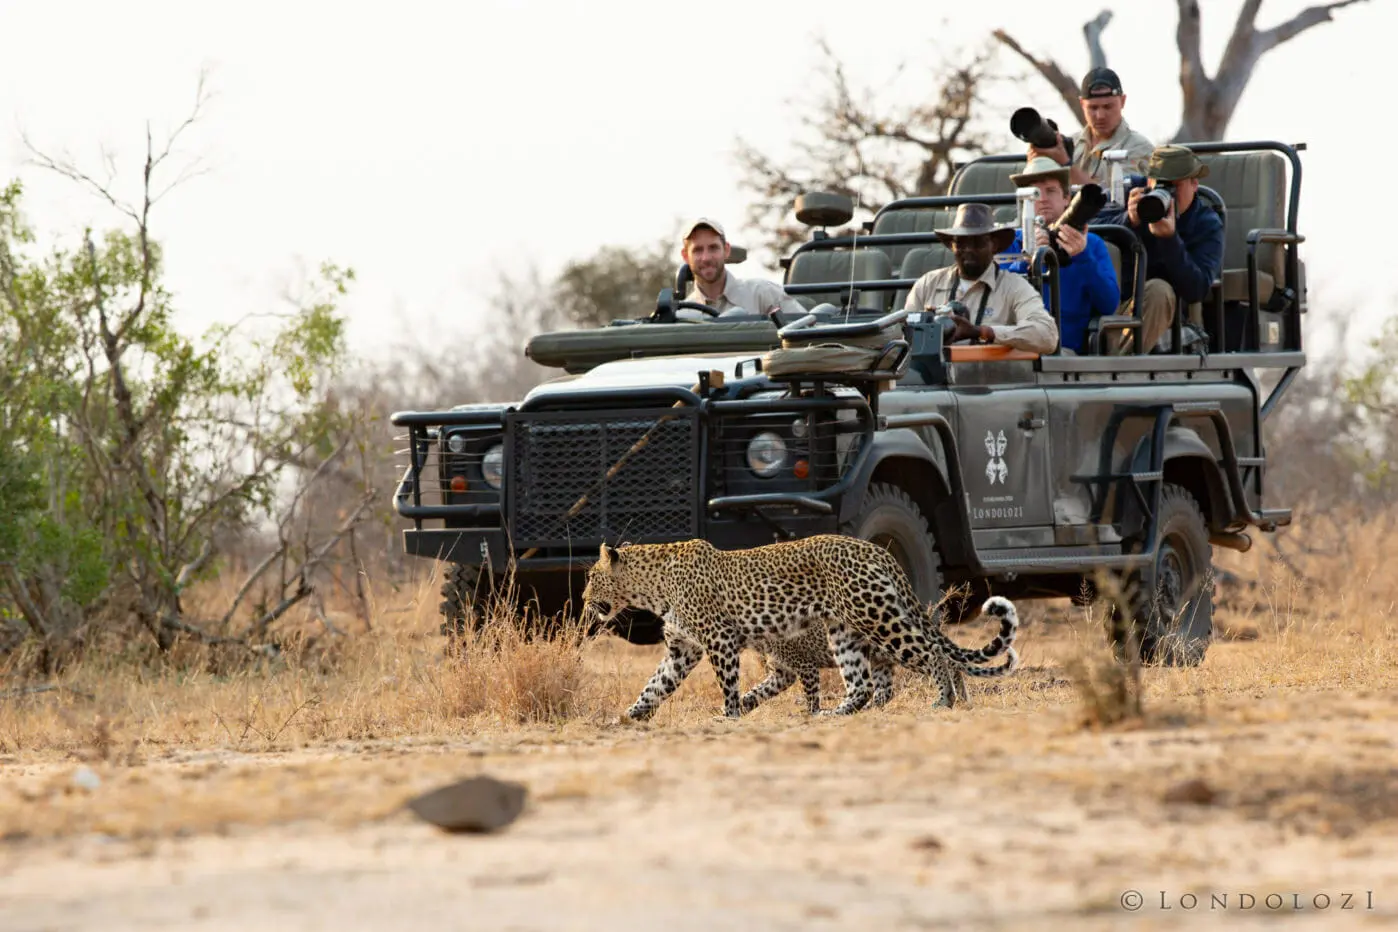 Kenya holiday packages - Our guests during a safari in Masai Mara National Reserve.